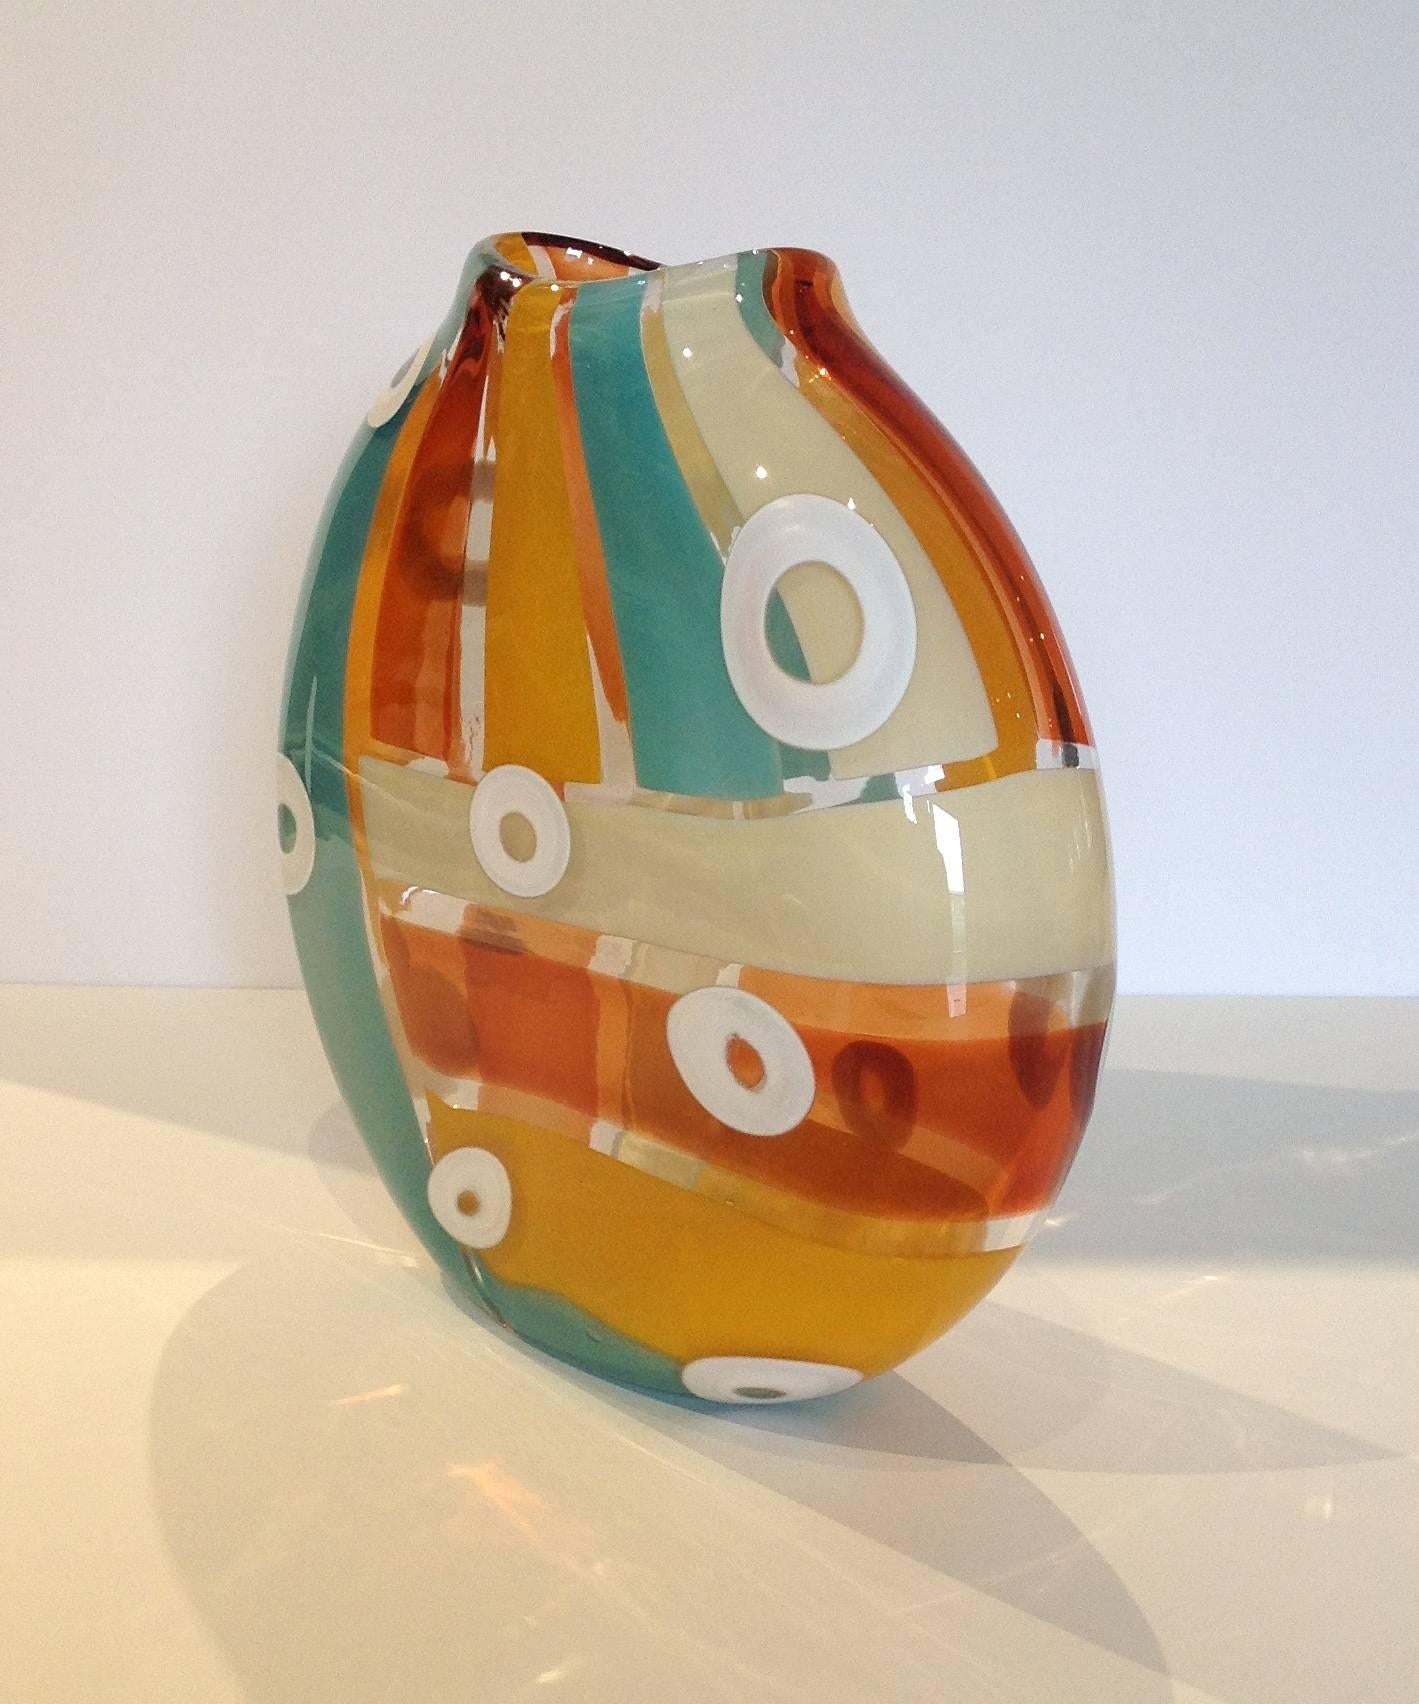 Leigh Taylor Wyatt has been working with glass since 1993. From vessel making to chandeliers she is enthralled with the processes of glass making. Leigh enjoys using the translucency of the material while creating patterns and textures within the